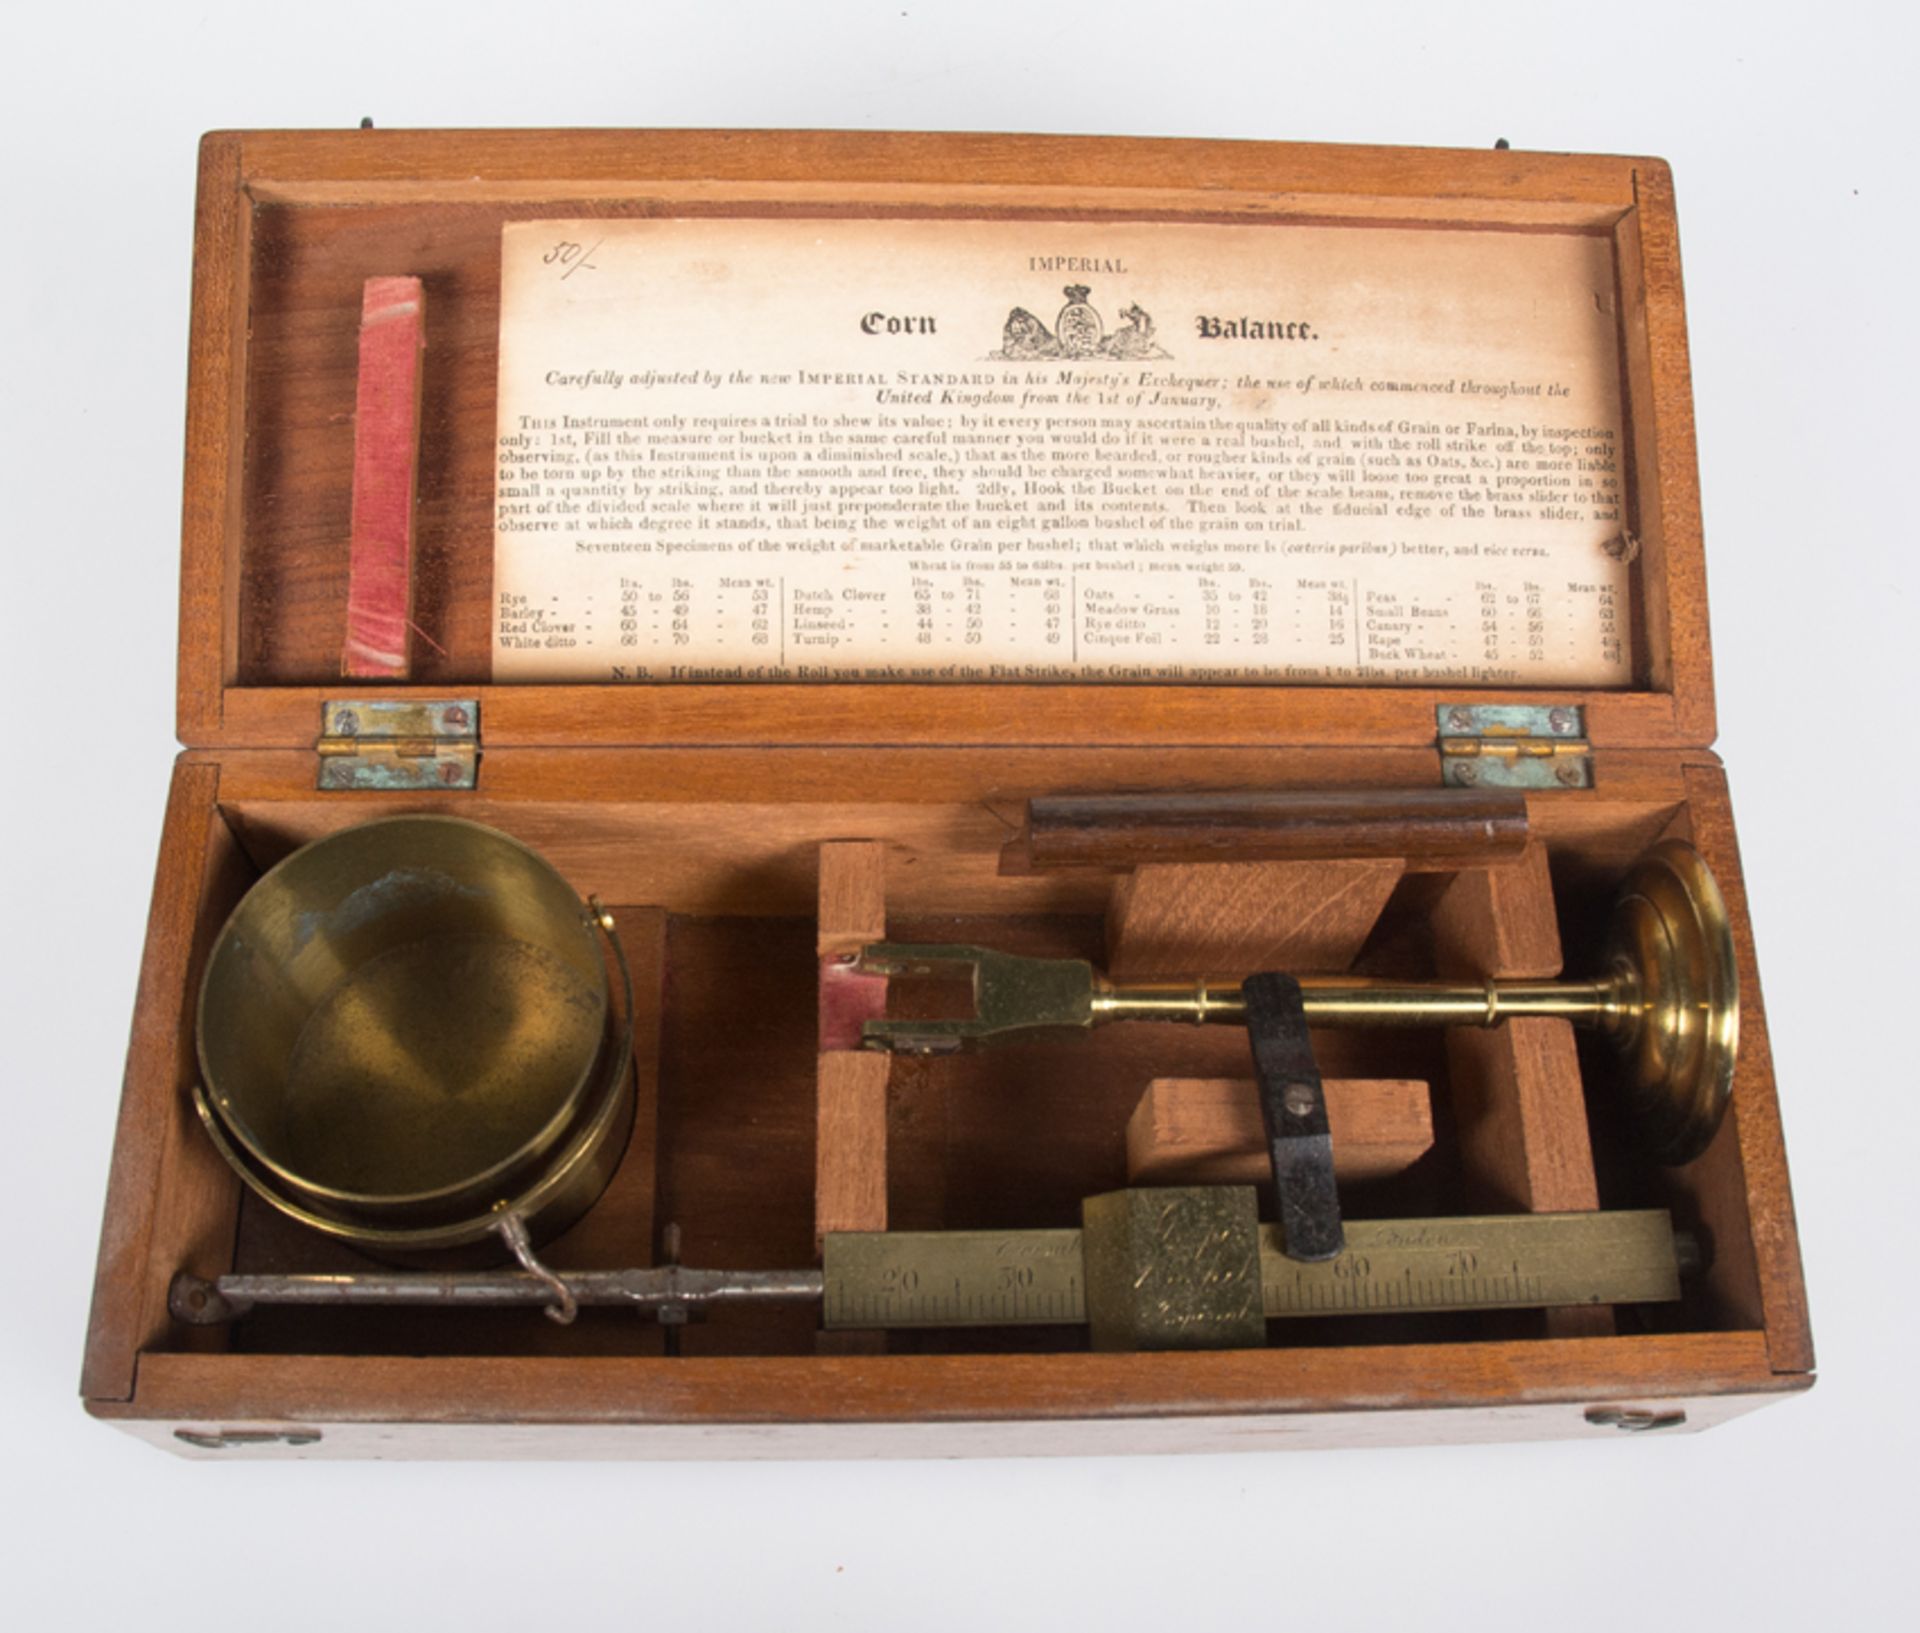 Precision scales. Coombe & Co. London. England. 19th century.